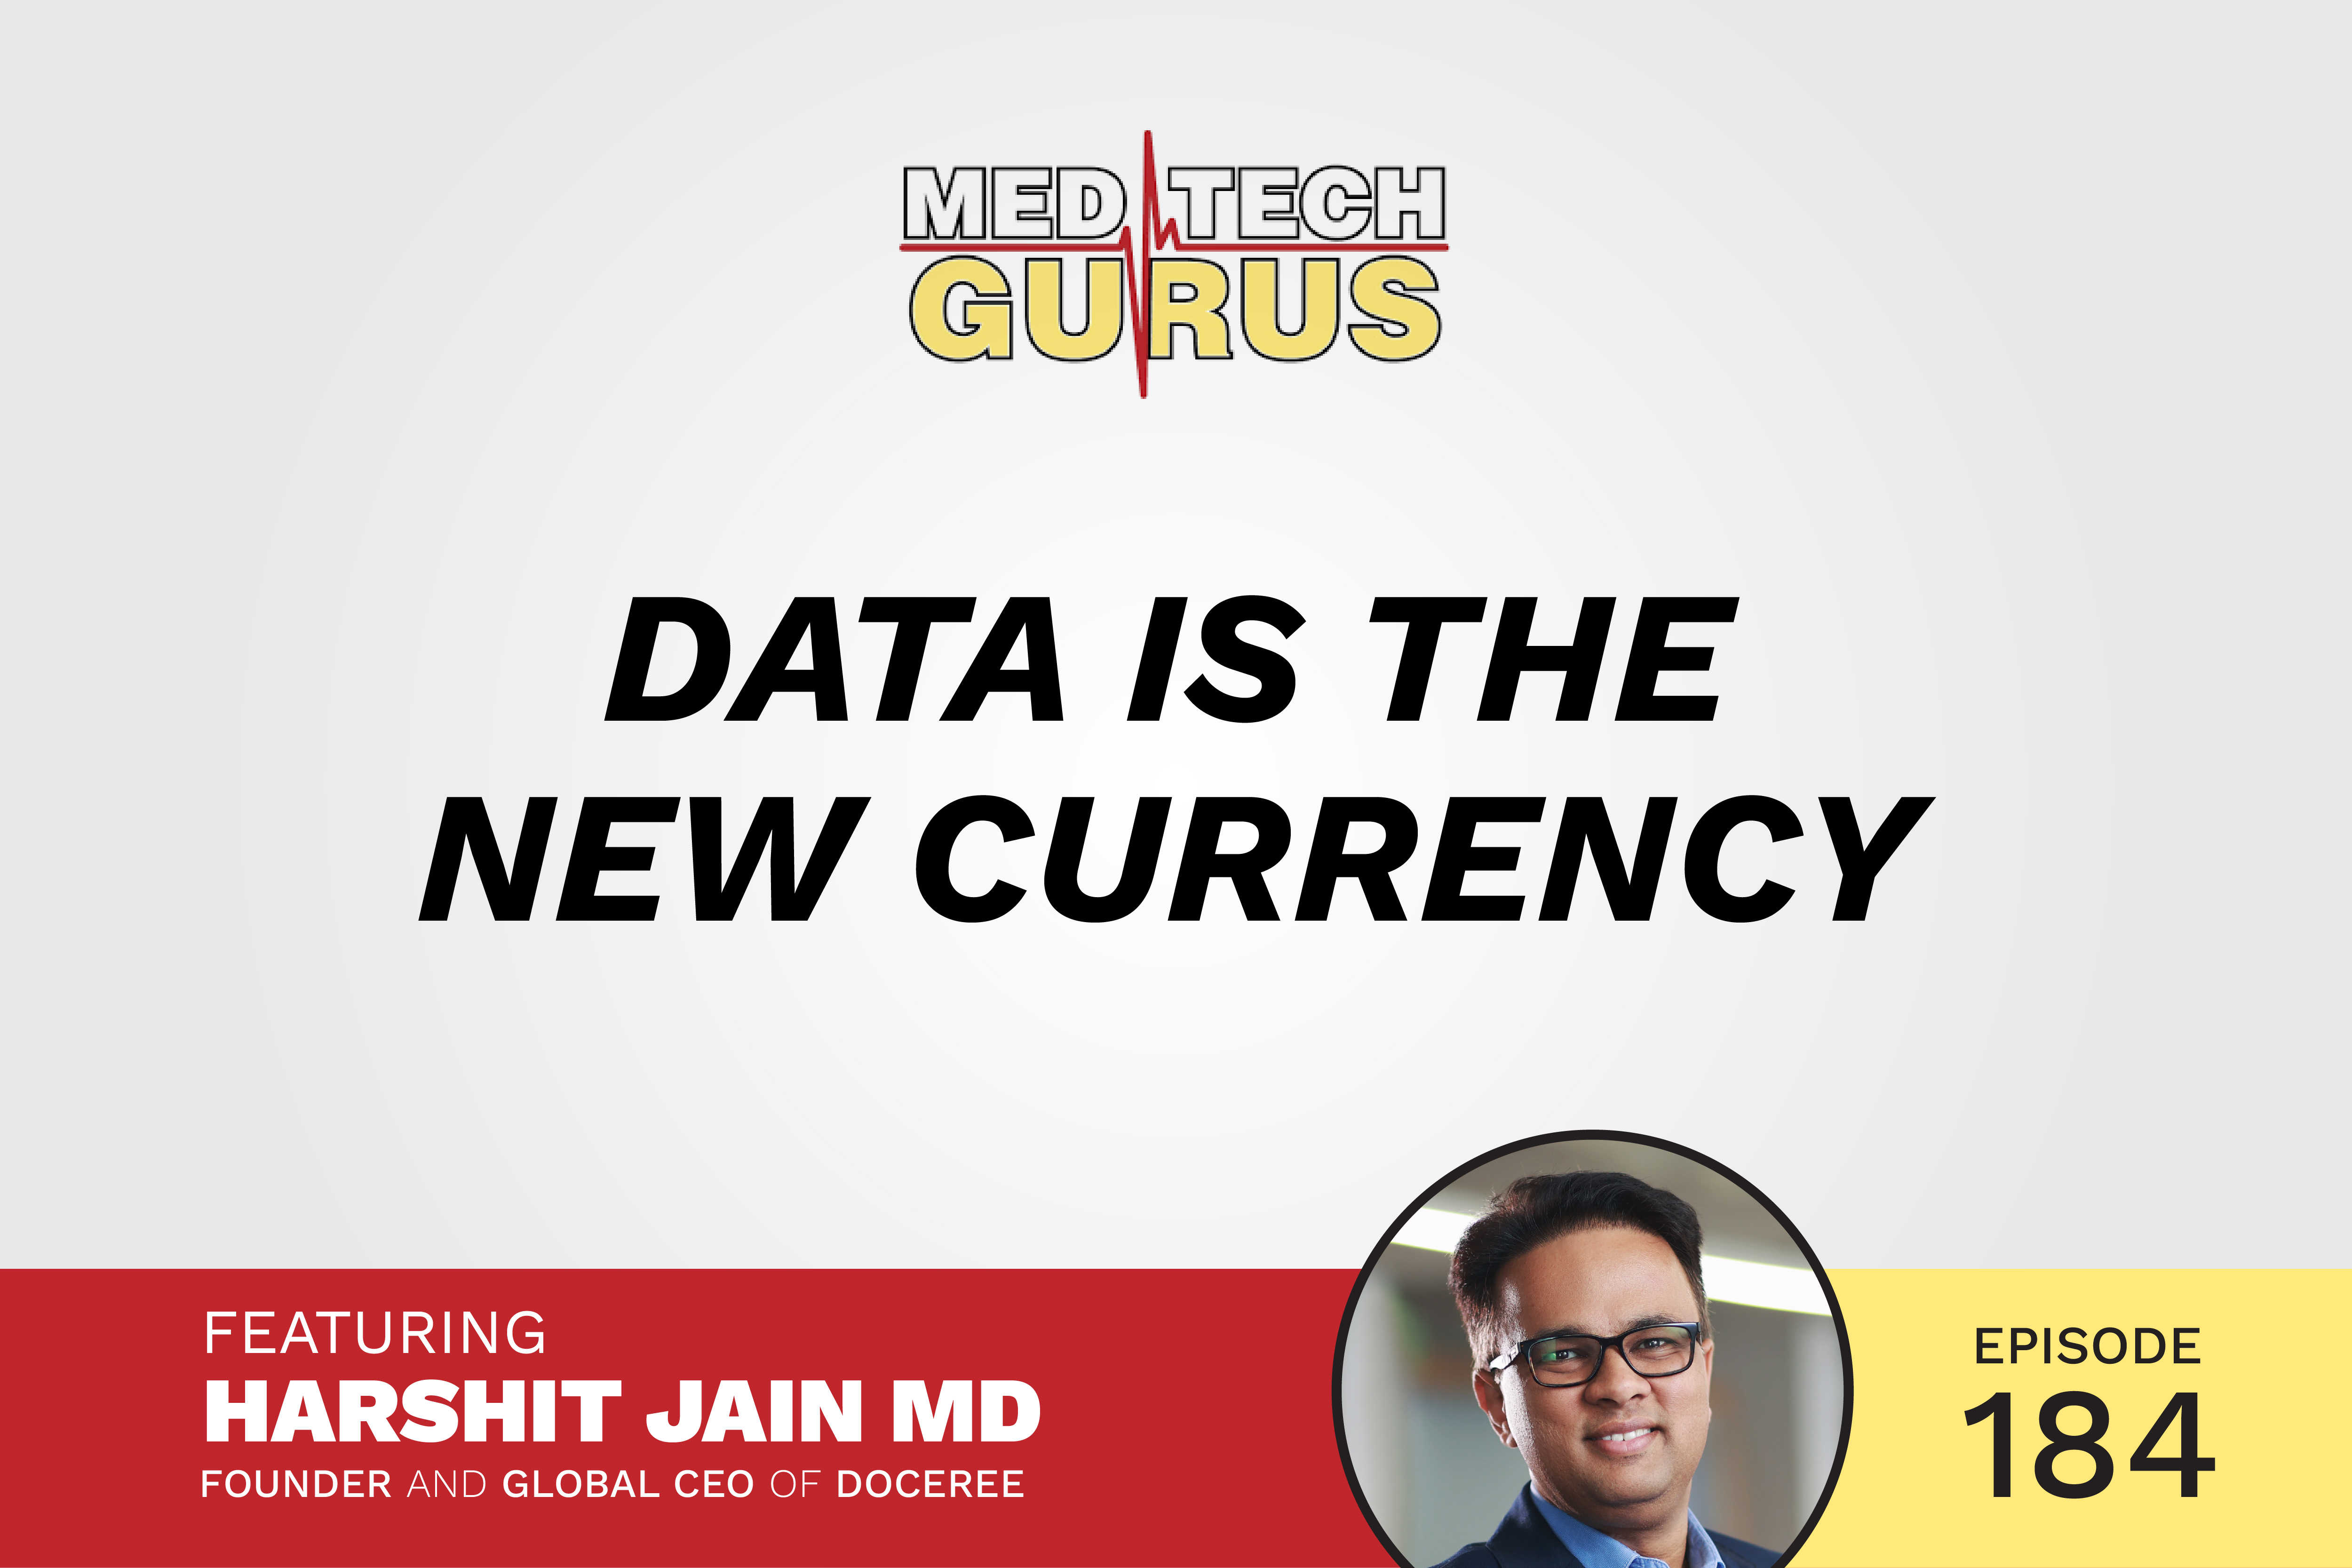 Data is the new currency